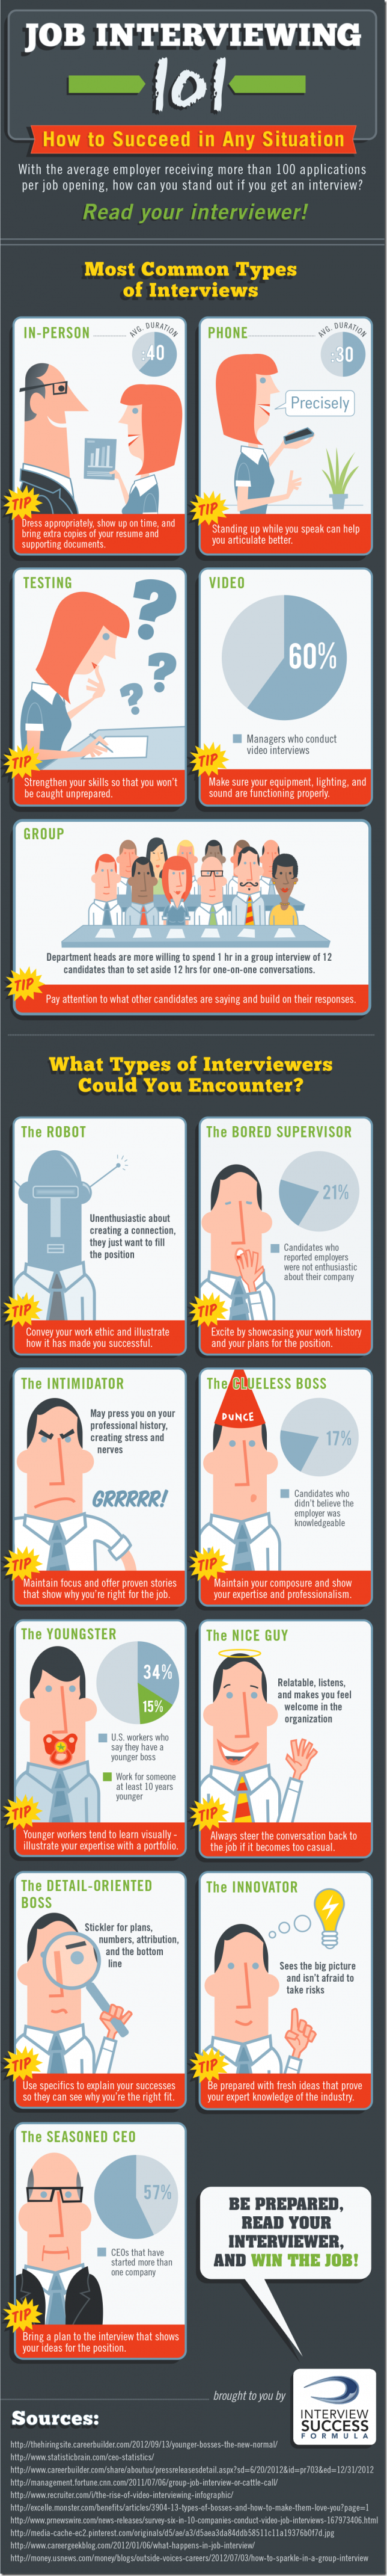 Job-Interviewing-Infographic1-640x4278